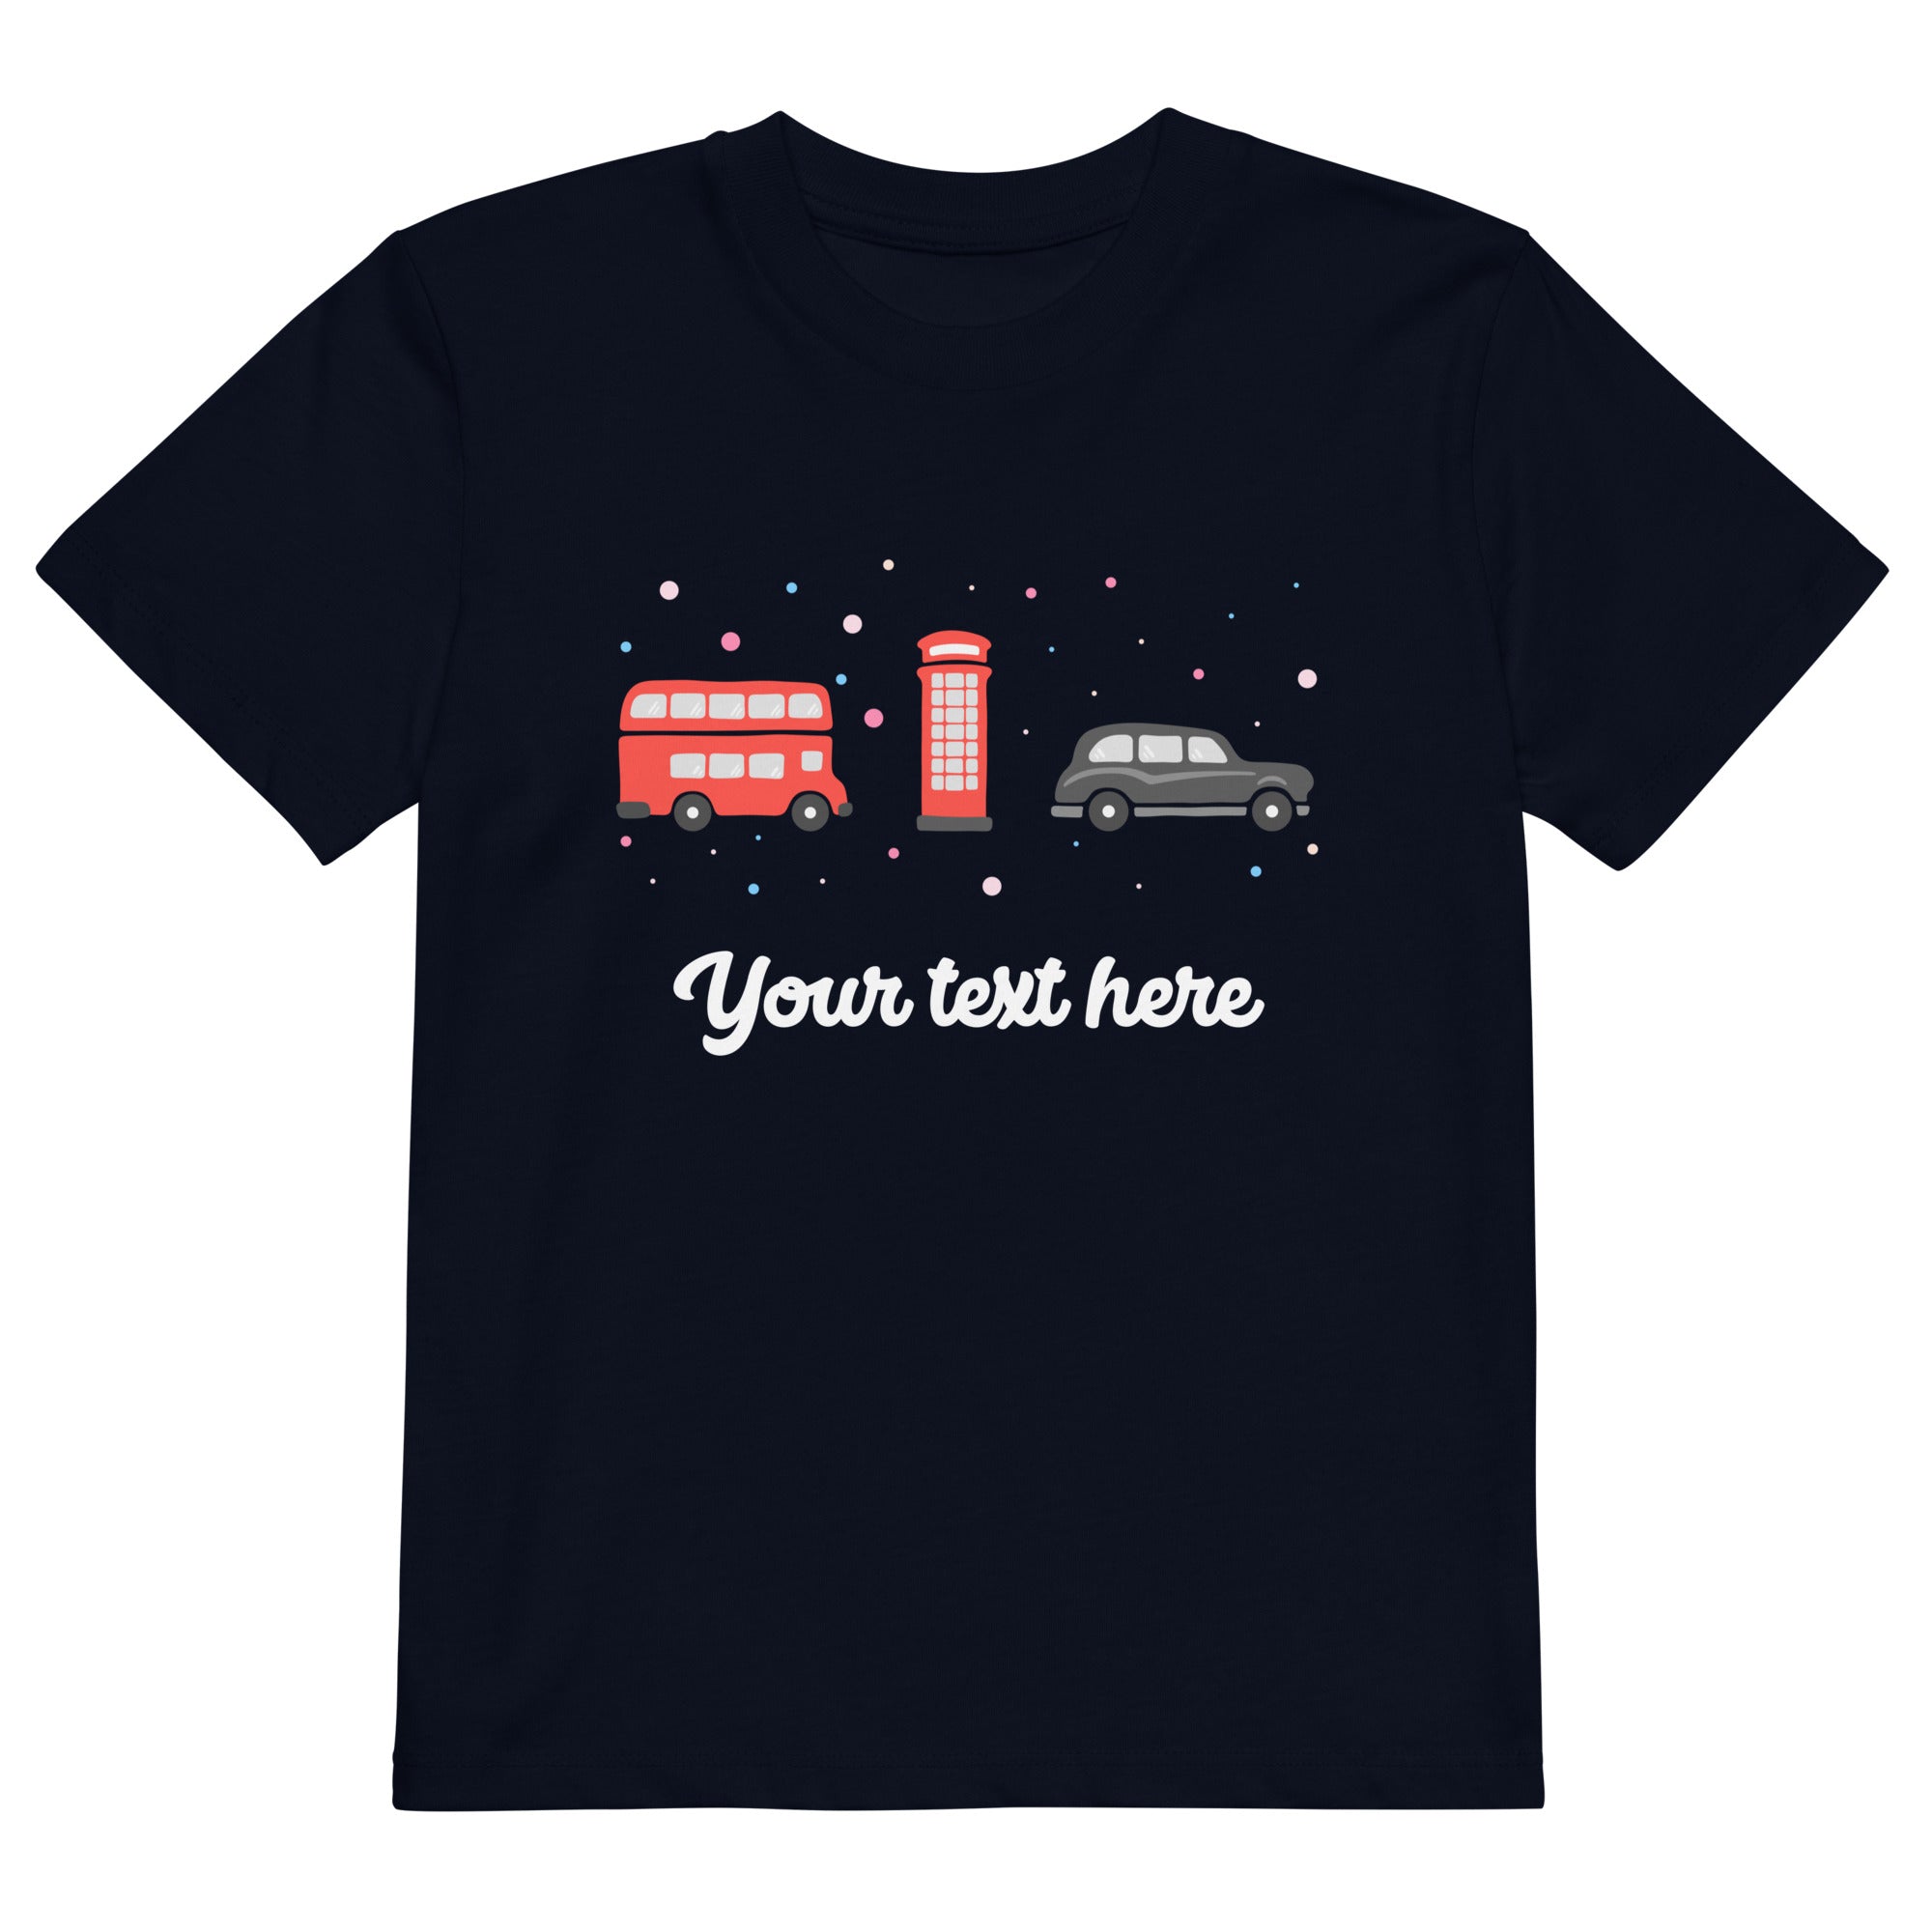 Personalised Custom Text - Organic Cotton Kids T-Shirt - London Doodles - Bus / Telephone / Taxi - Navy 1